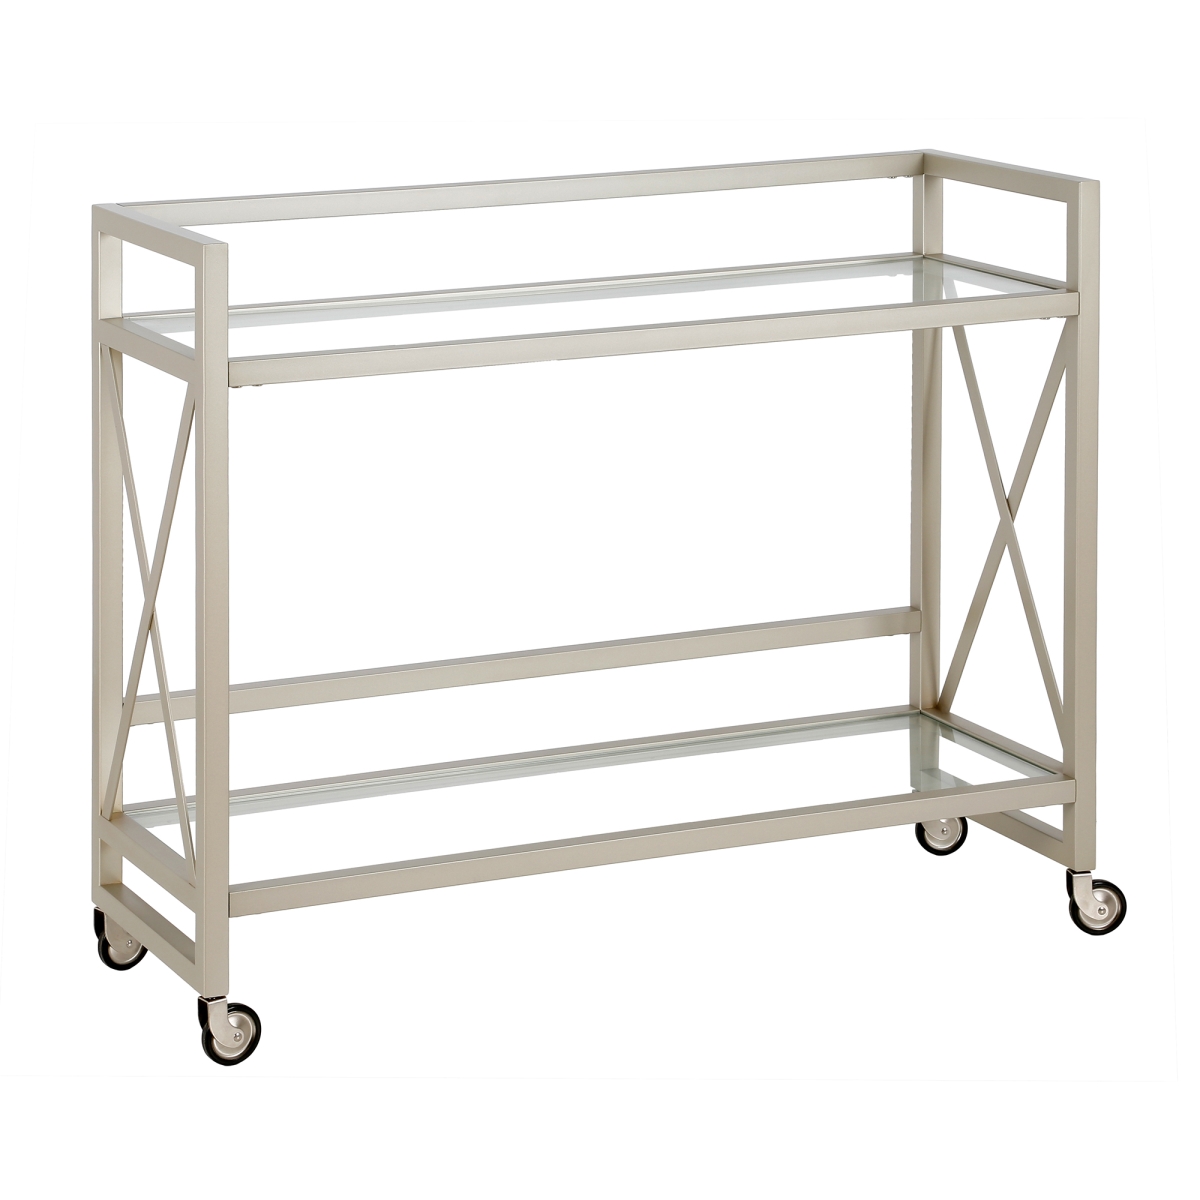 Picture of Henn &amp; Hart BC0881 Holly Satin Nickel Bar Cart - 32 x 38 x 13 in.